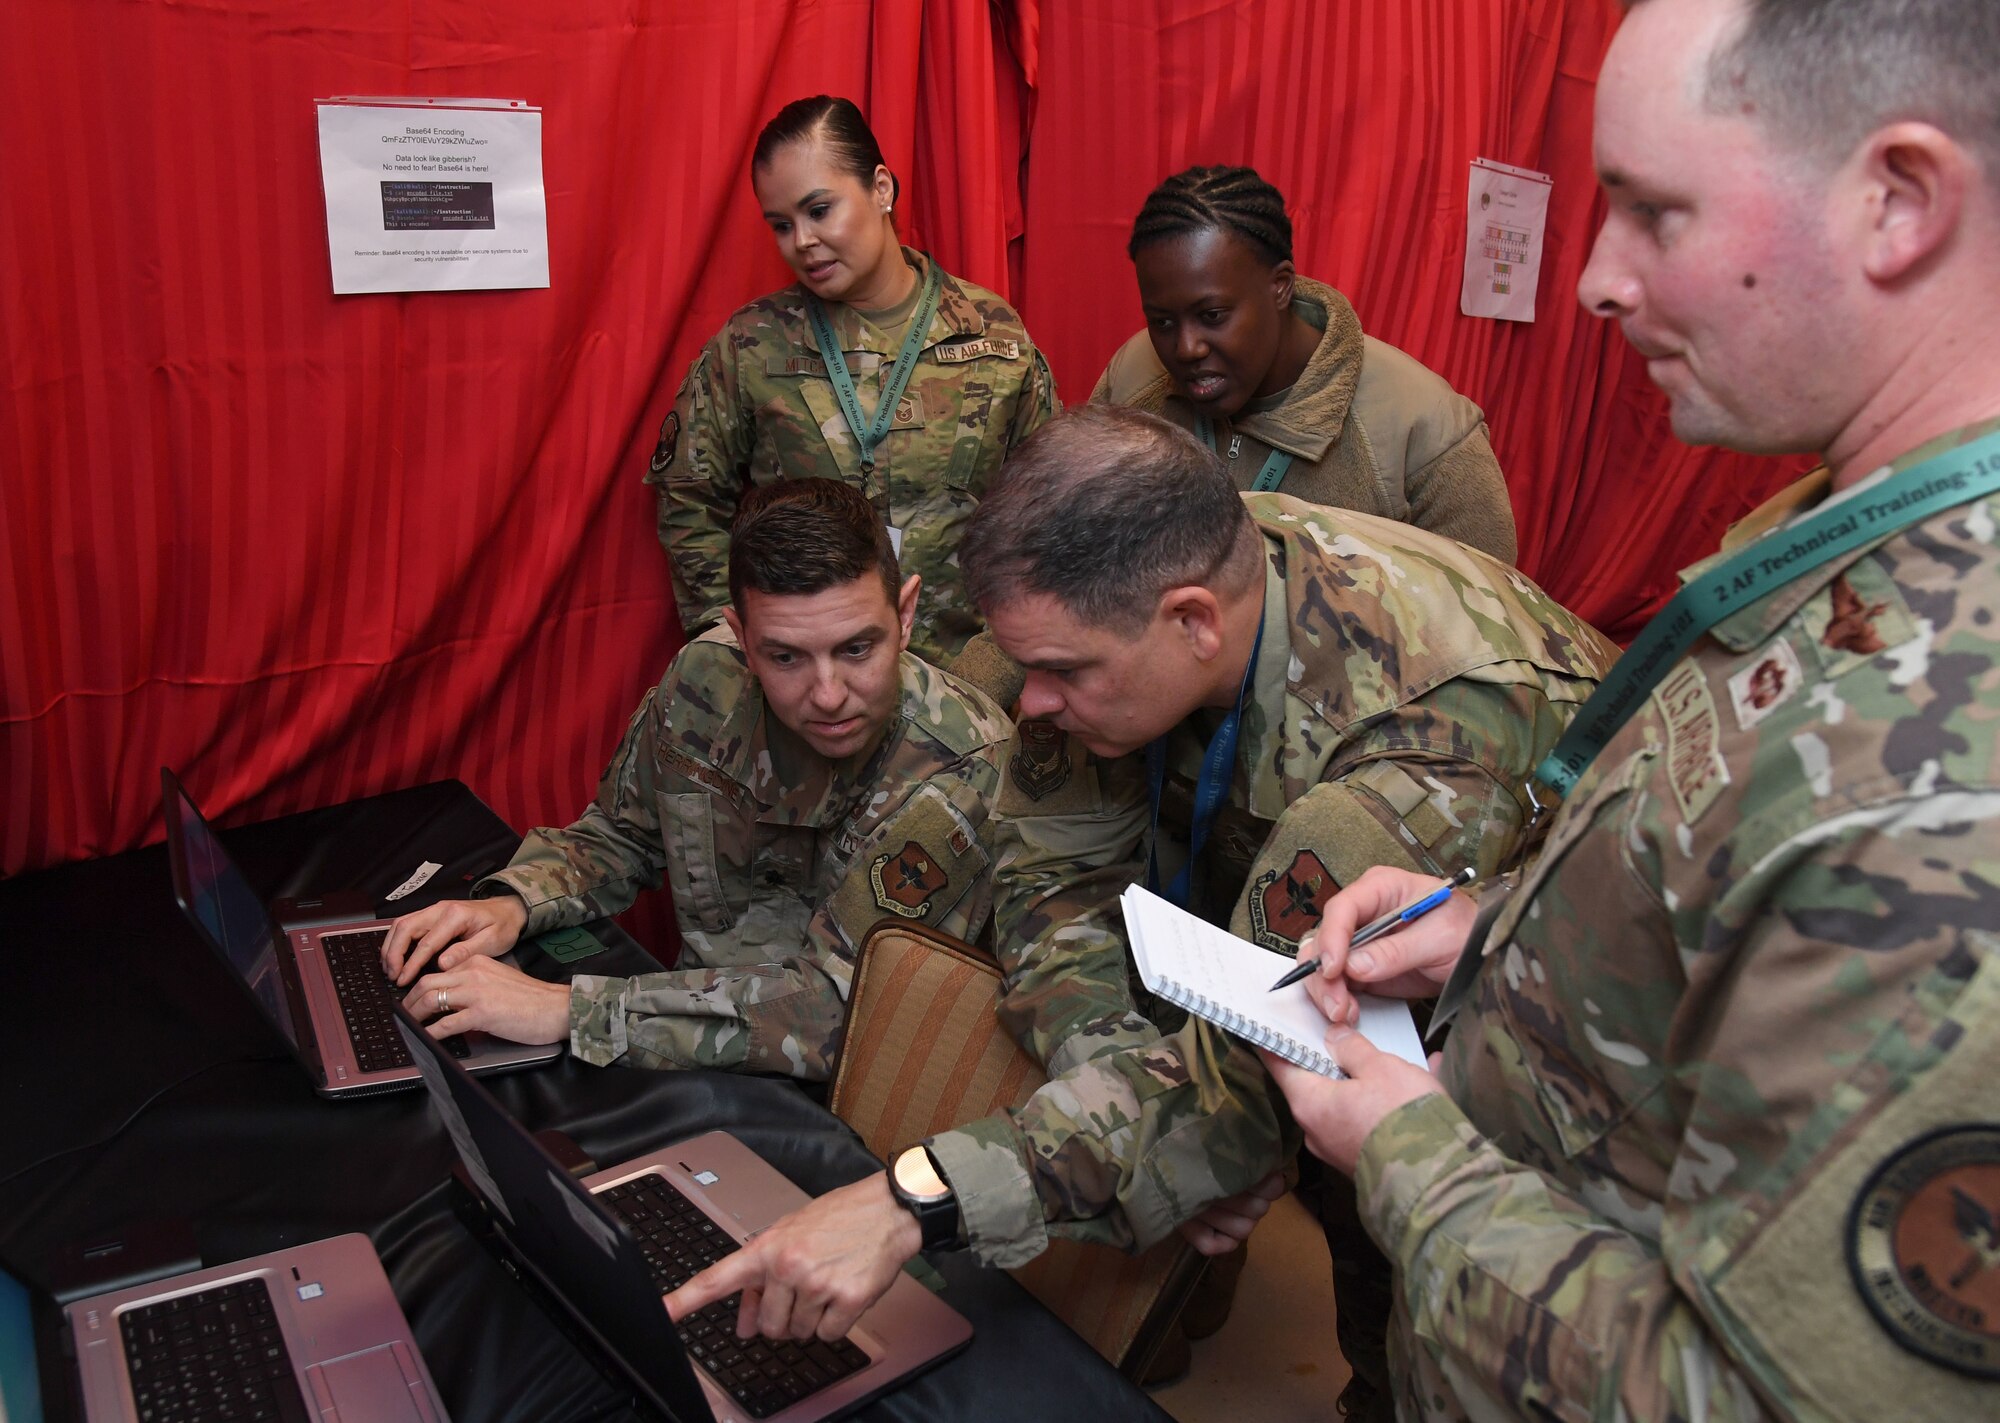 Members of the Inter-American Air Forces Academy, Joint Base San Antonio-Lackland Air Force Base, Texas, participate in the 333rd Training Squadron escape room during the innovation expo during the Second Air Force Technical Training-101 Seminar inside the Bay Breeze Event Center at Keesler Air Force Base, Mississippi, Oct. 25, 2022.